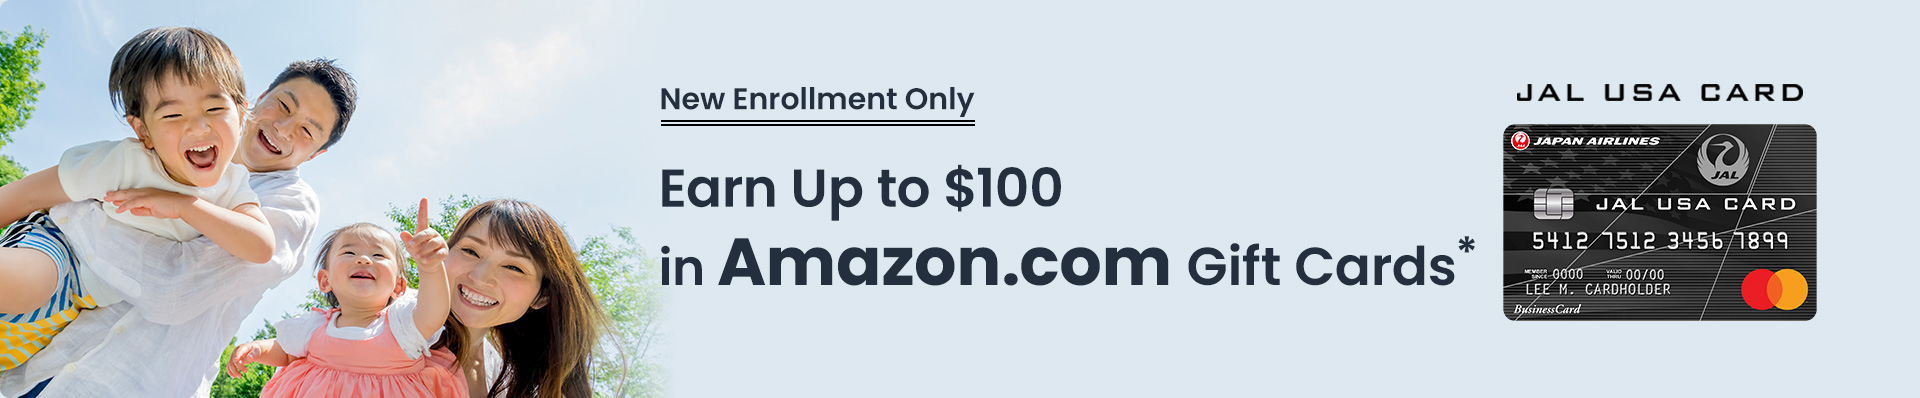 Earn Up to $100 in Amazon.com Gift Cards*